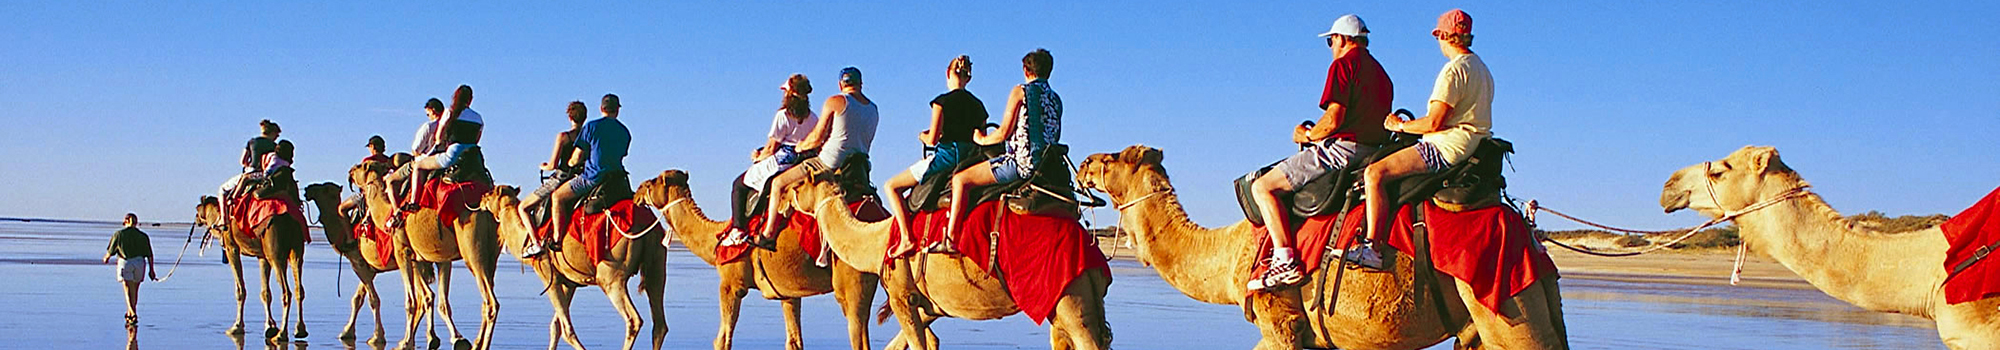 Tourists on Camels on the beach